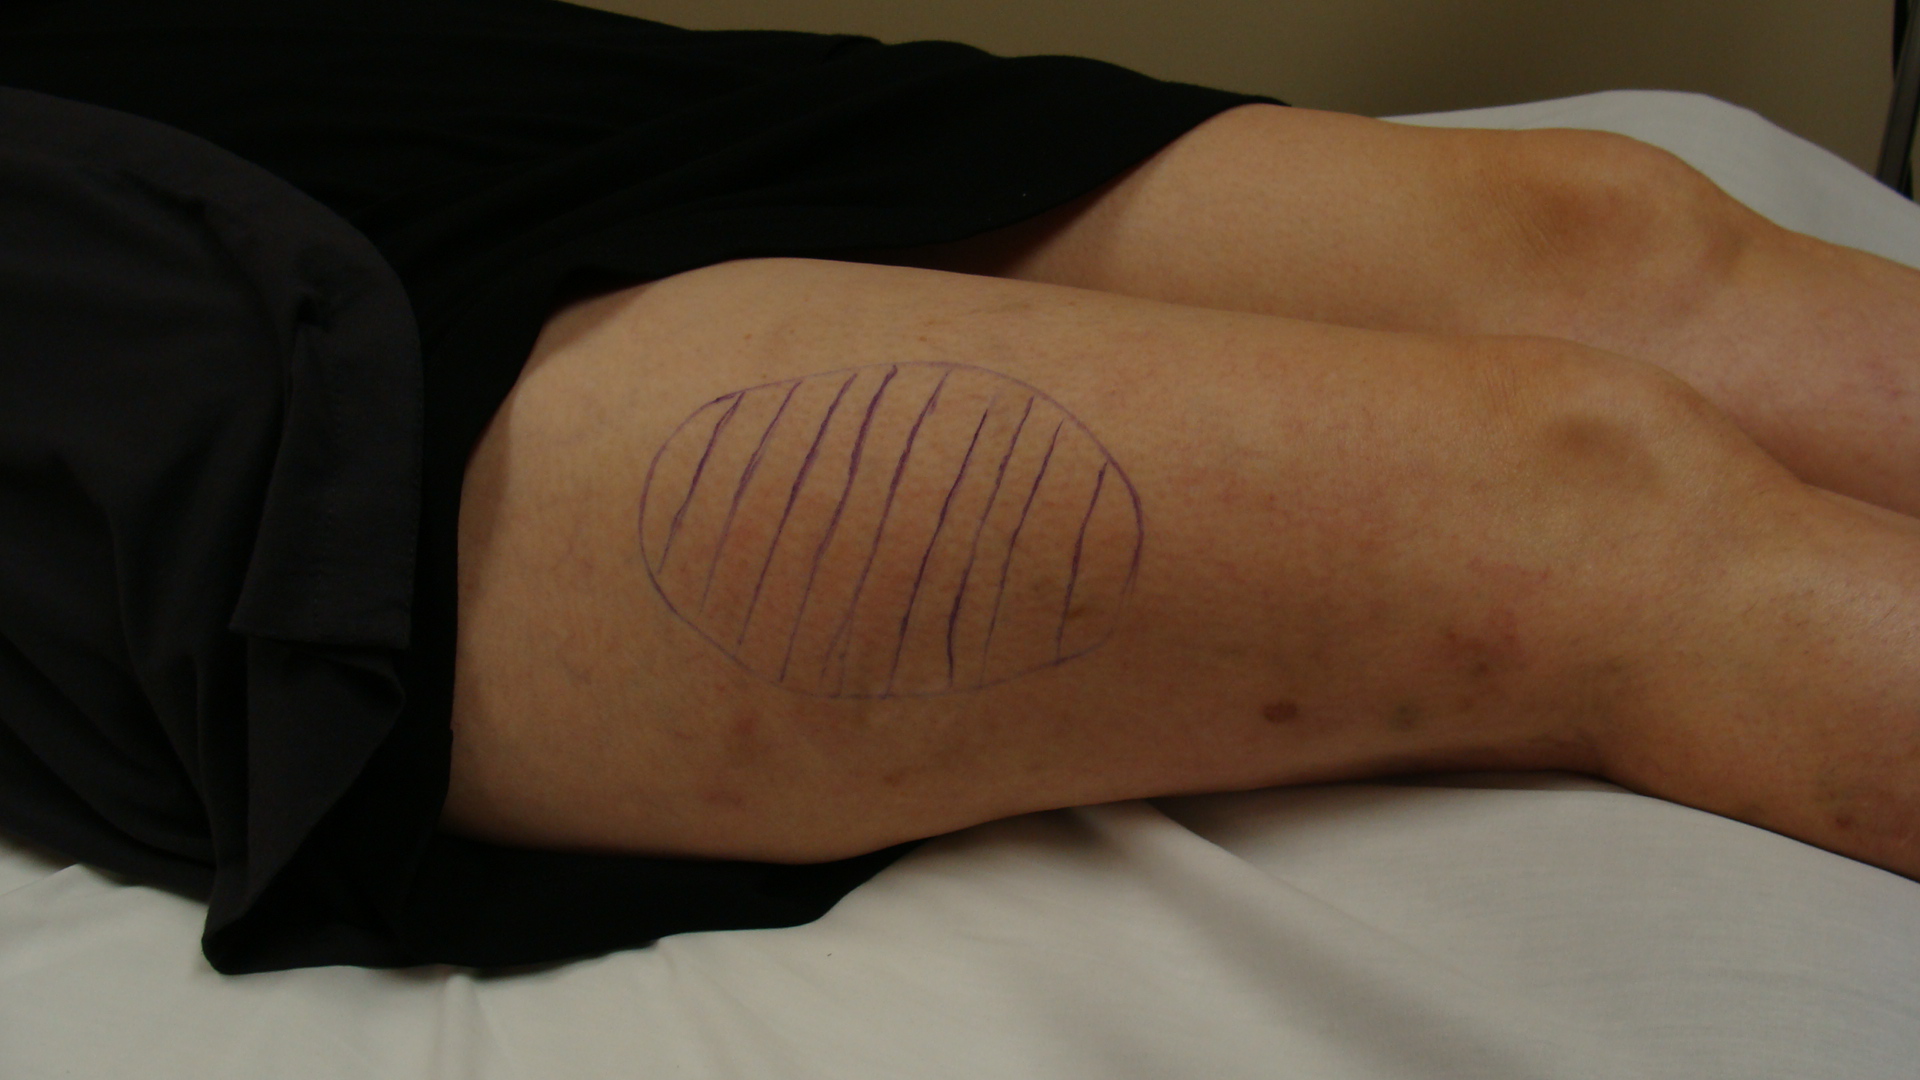 Treating meralgia paresthetica with acupuncture